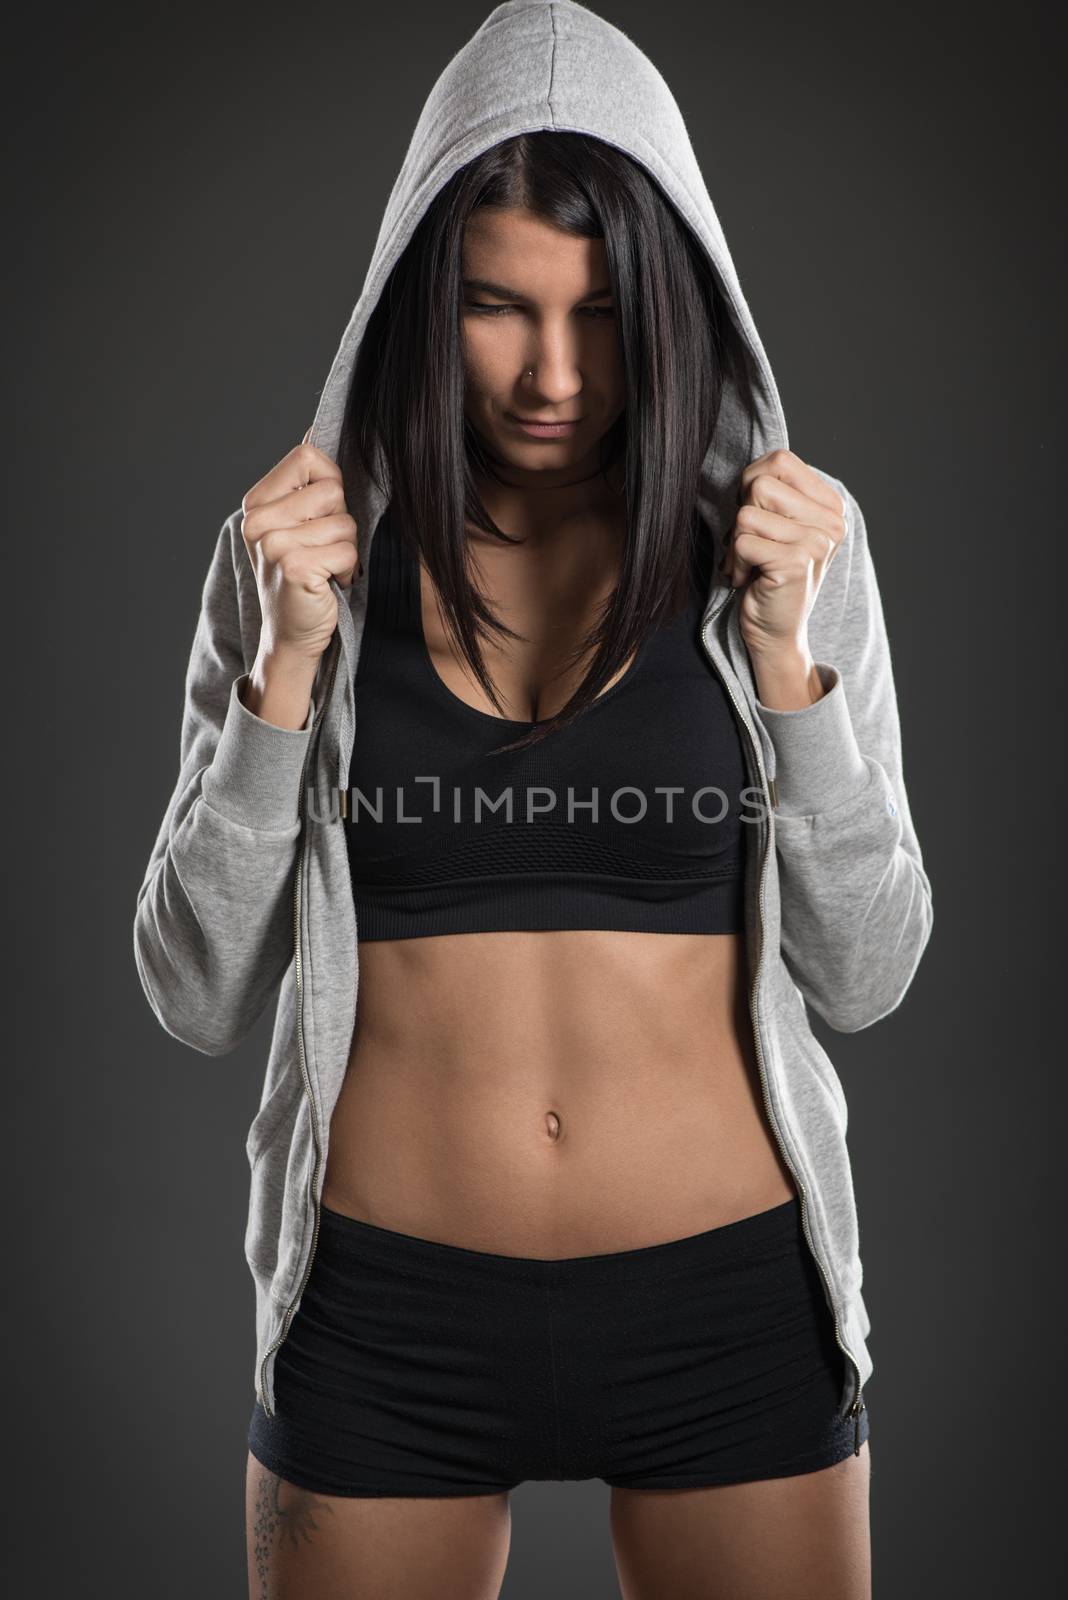 Attractive muscular young woman posing in studio on dark background 